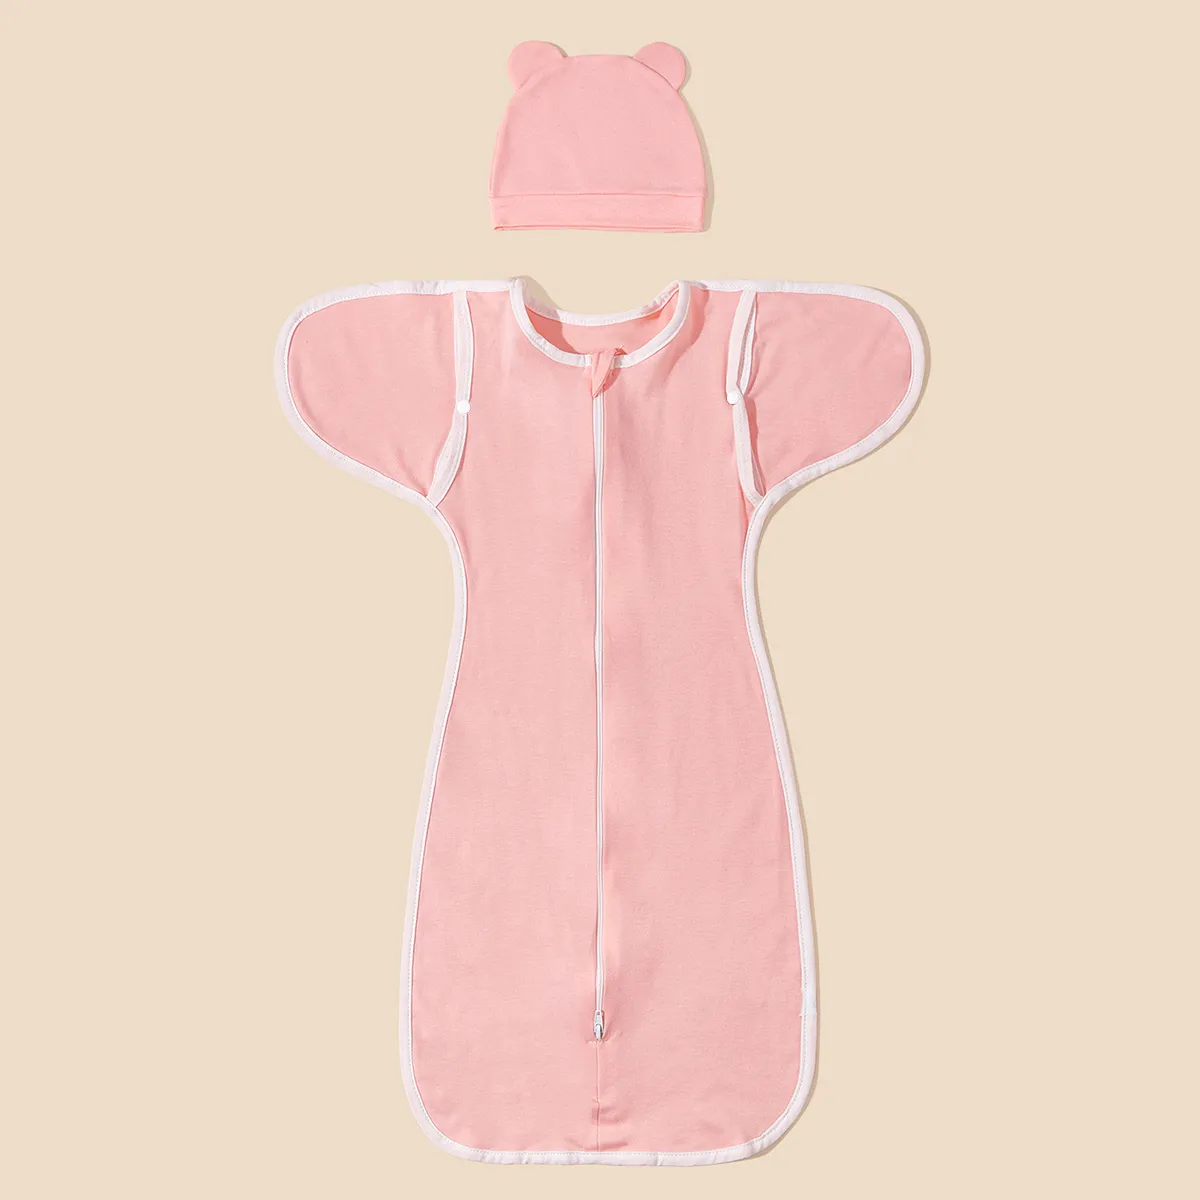 100% Cotton Medium Thickness Unisex Anti-Kick Design With Buttons Solid Color Baby Sleeping Bag For Child Bedding